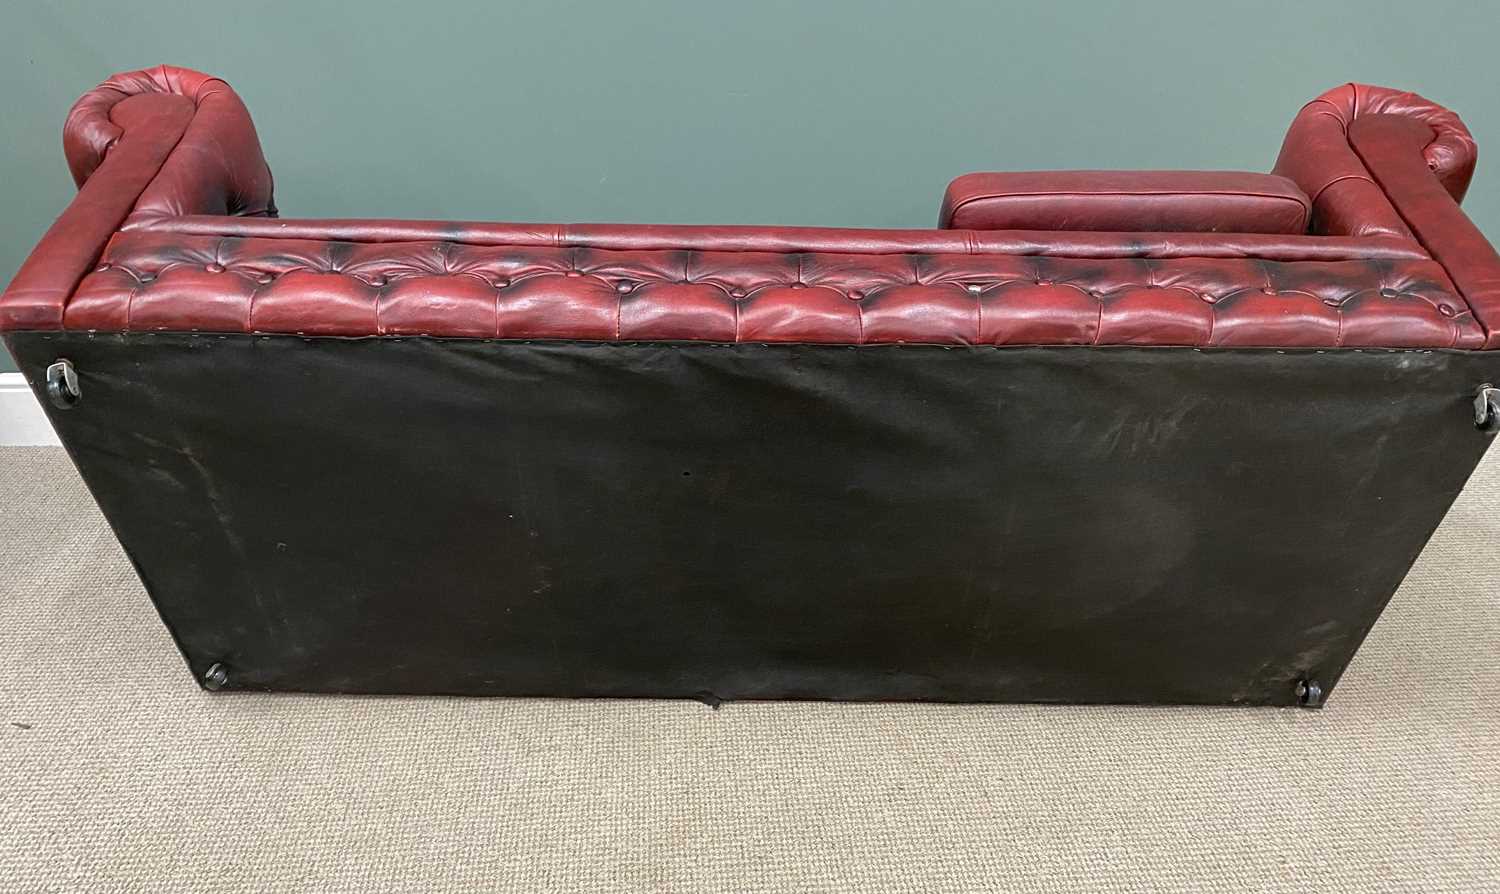 RED LEATHER THREE SEATER CHESTERFIELD SOFA 68 (h) x 208 (w) x 57cms (d) Provenance: private - Image 6 of 6